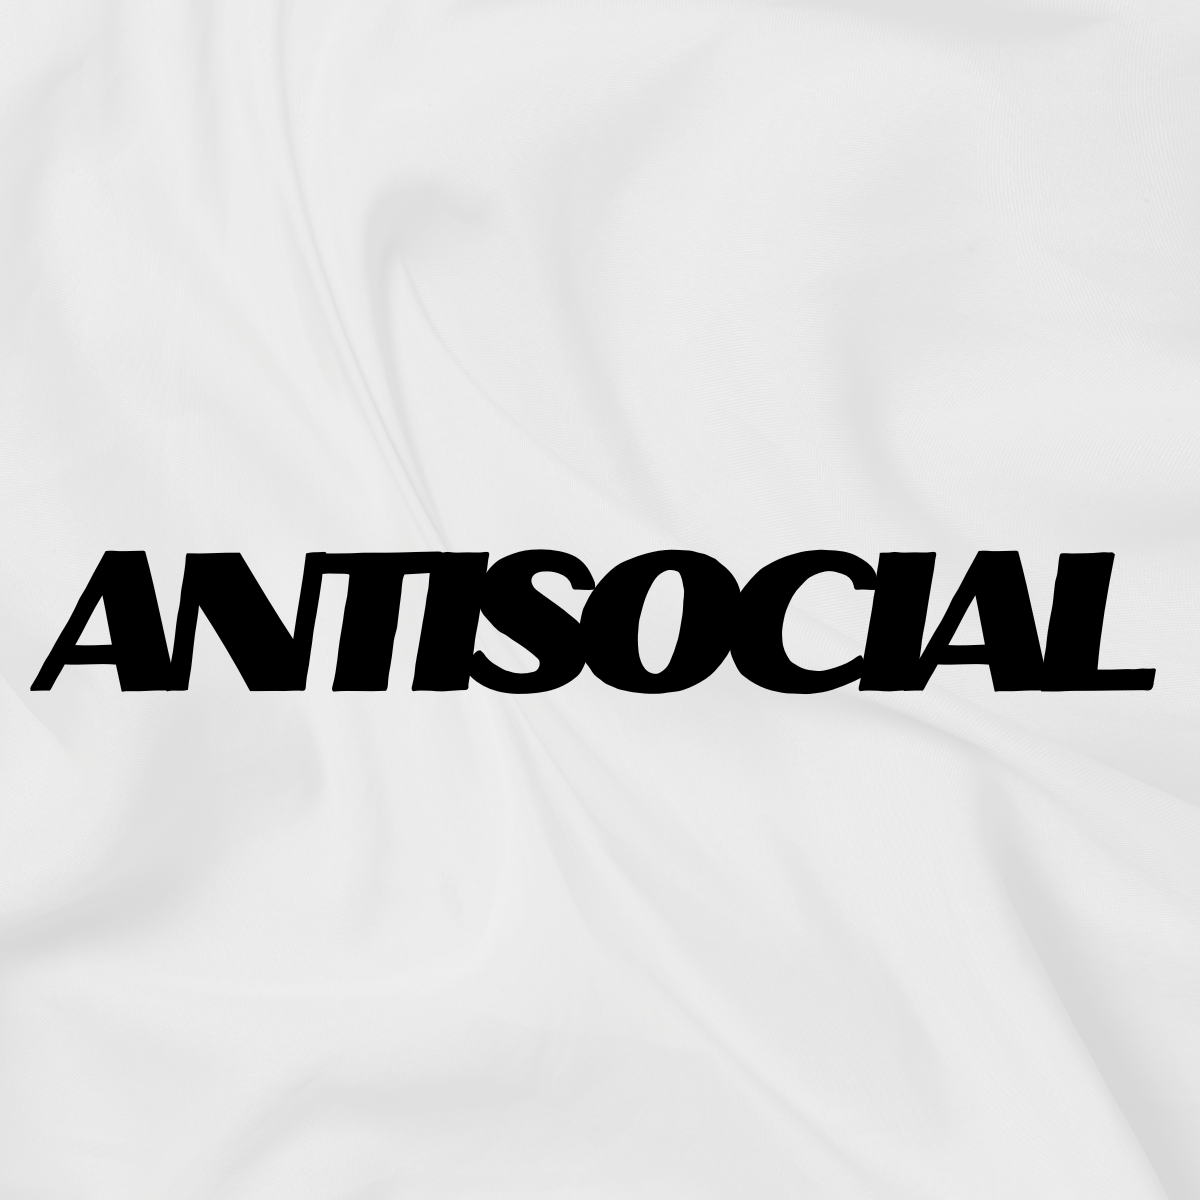 Antisocial Decal